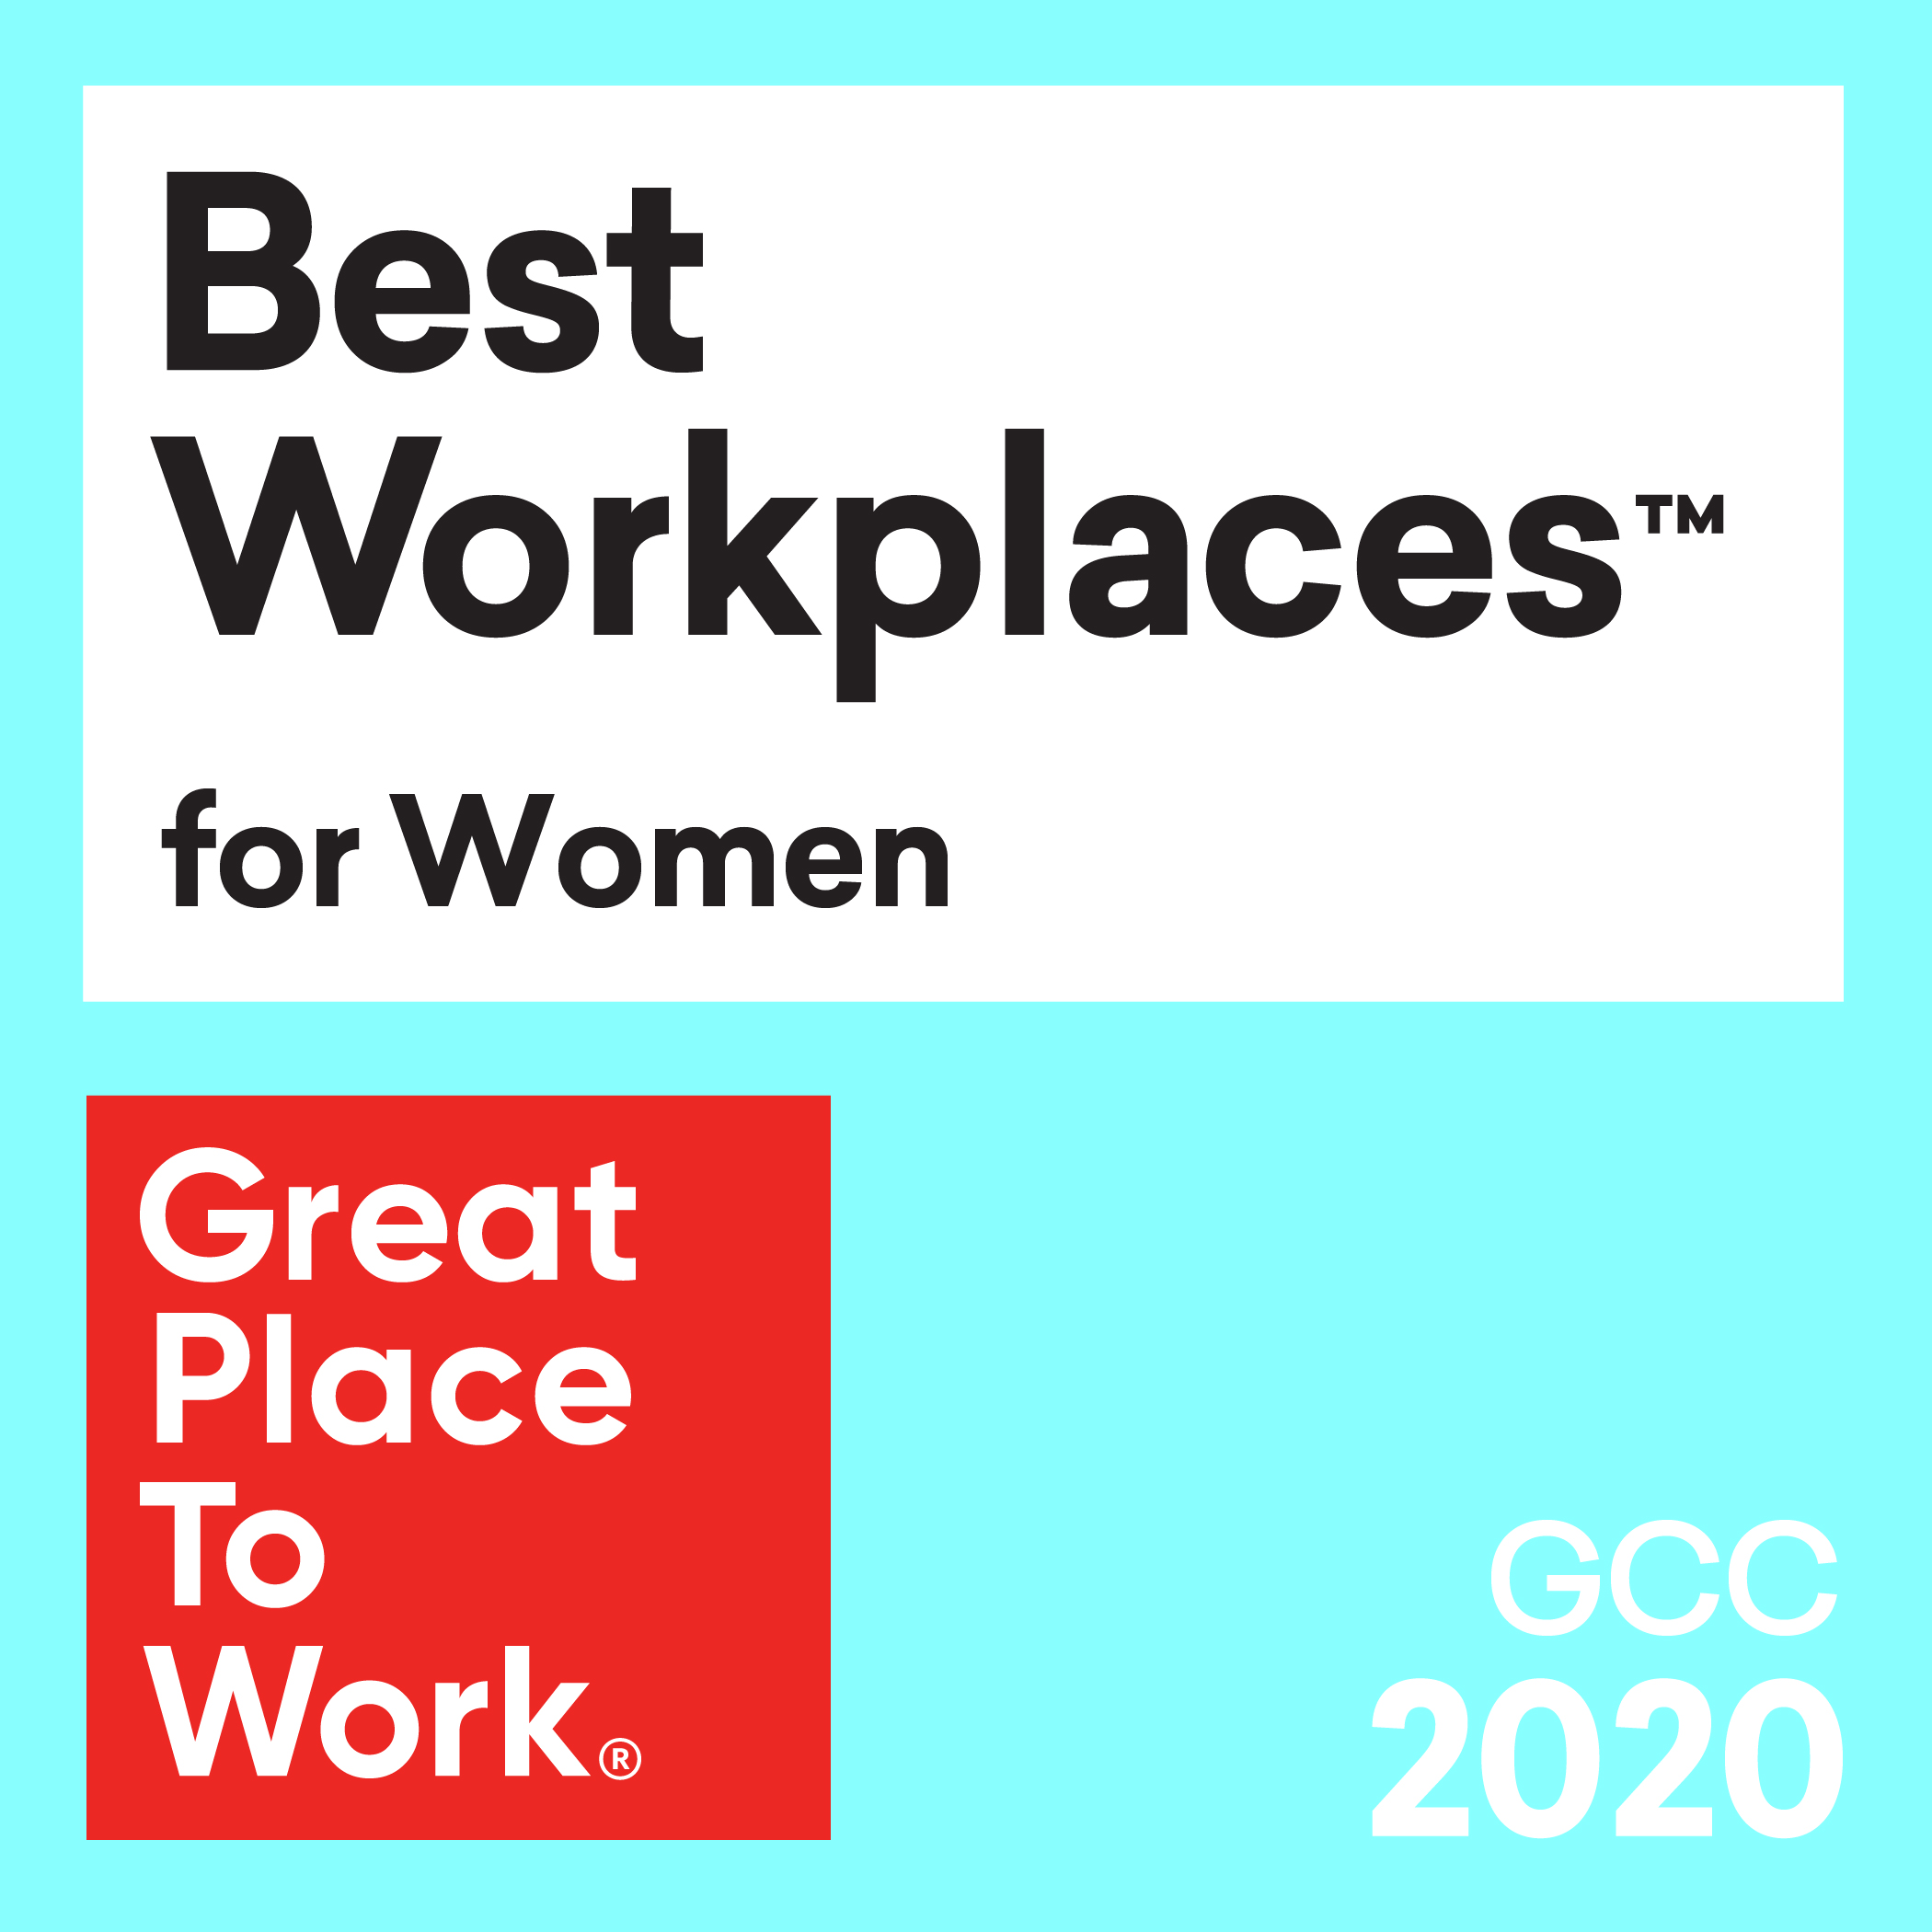 Image for For The First Time In GCC, Great Place To Work Reveals 2020 Best Workplaces For Women